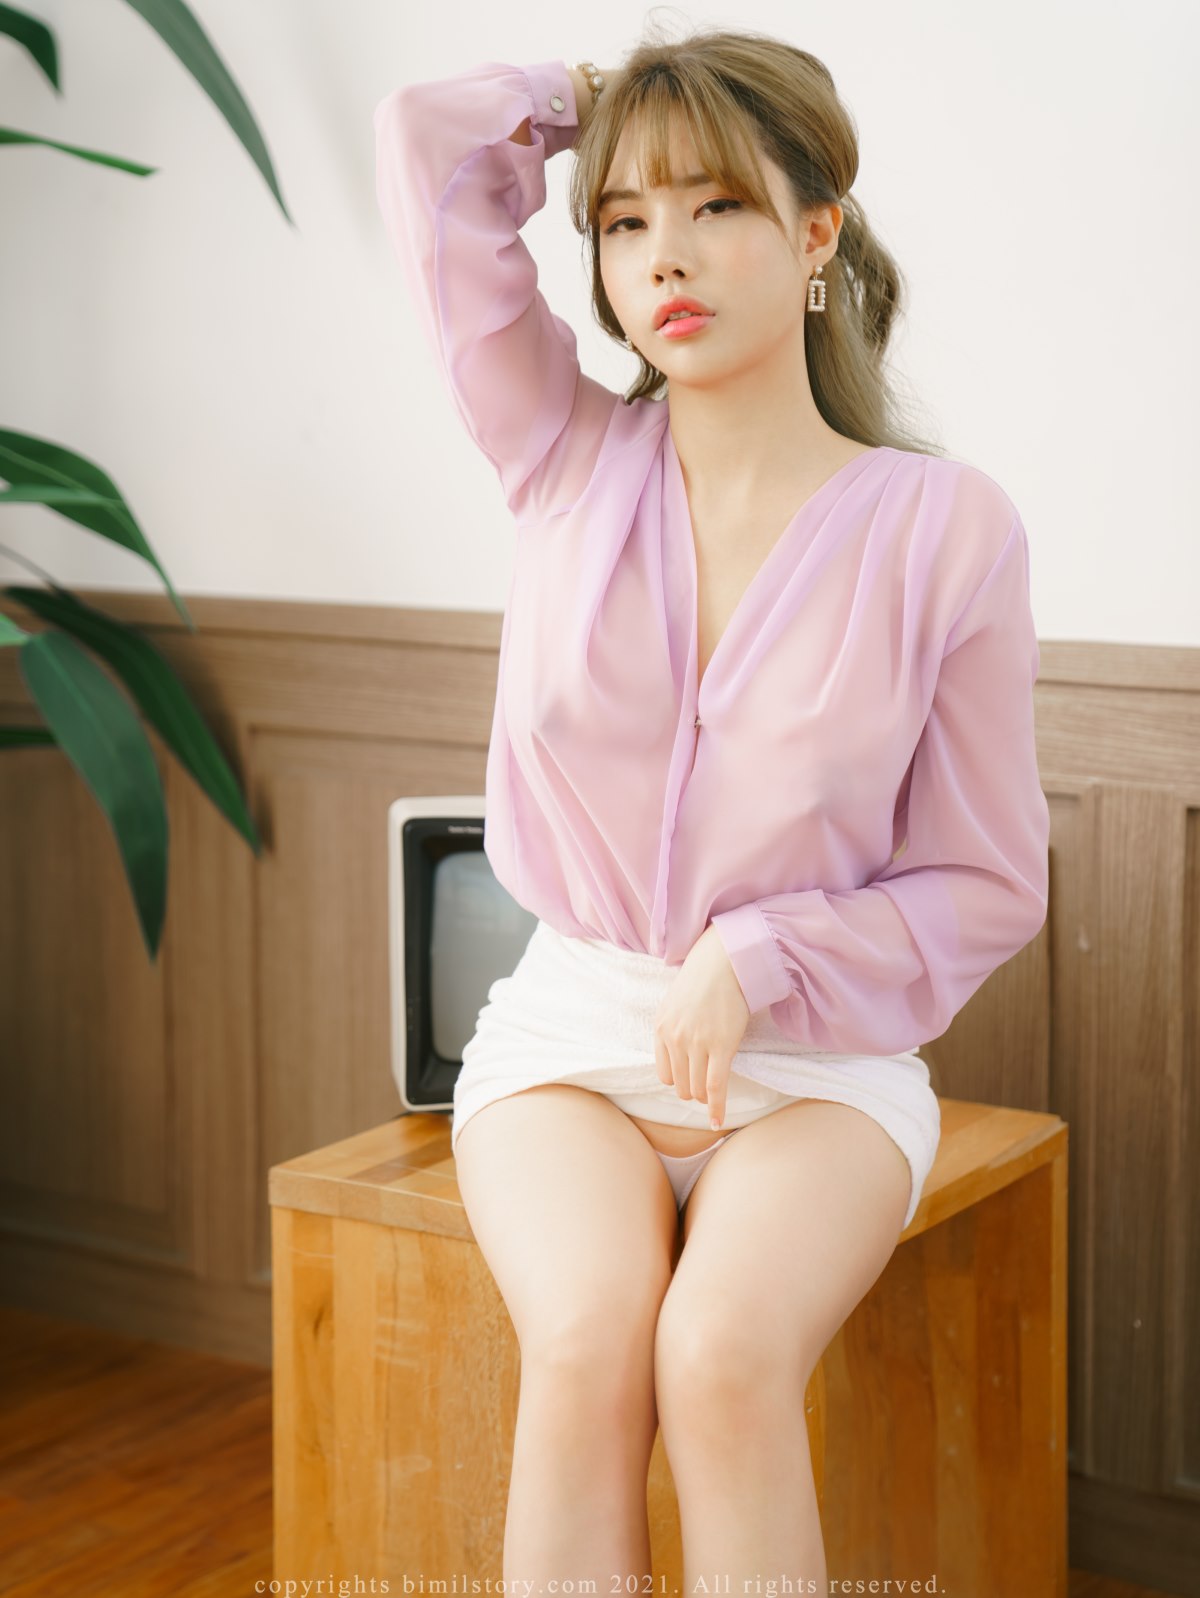 Bimilstory Eunha 은하 Vol 04 How to Dress in Case of F Cup Size Woman 0020 9864324246.jpg